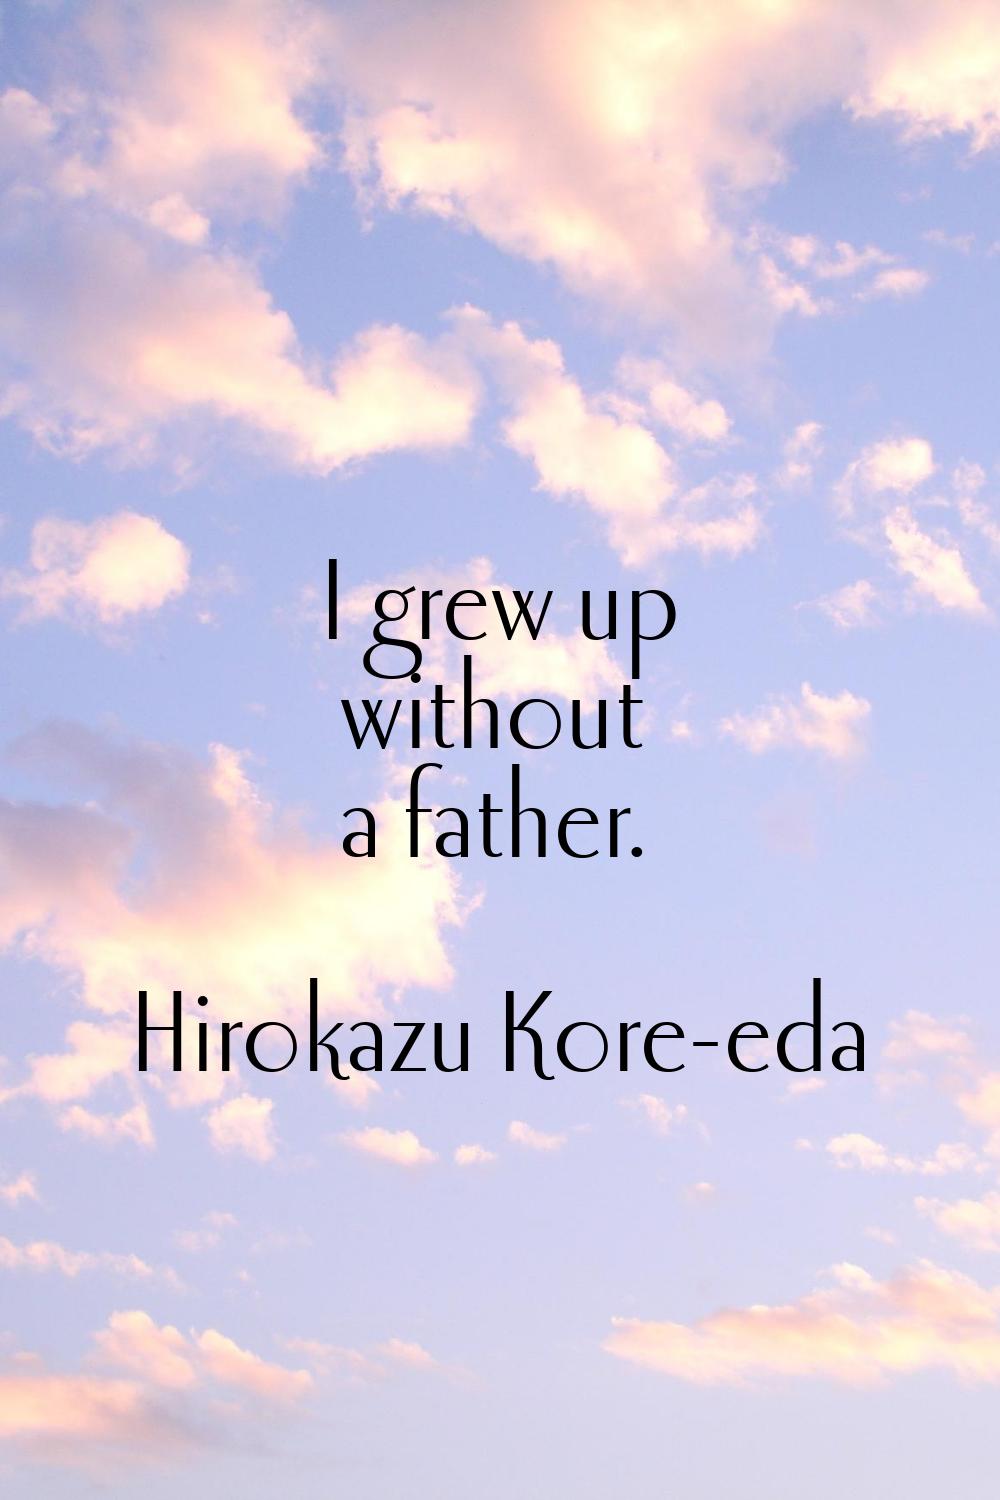 I grew up without a father.